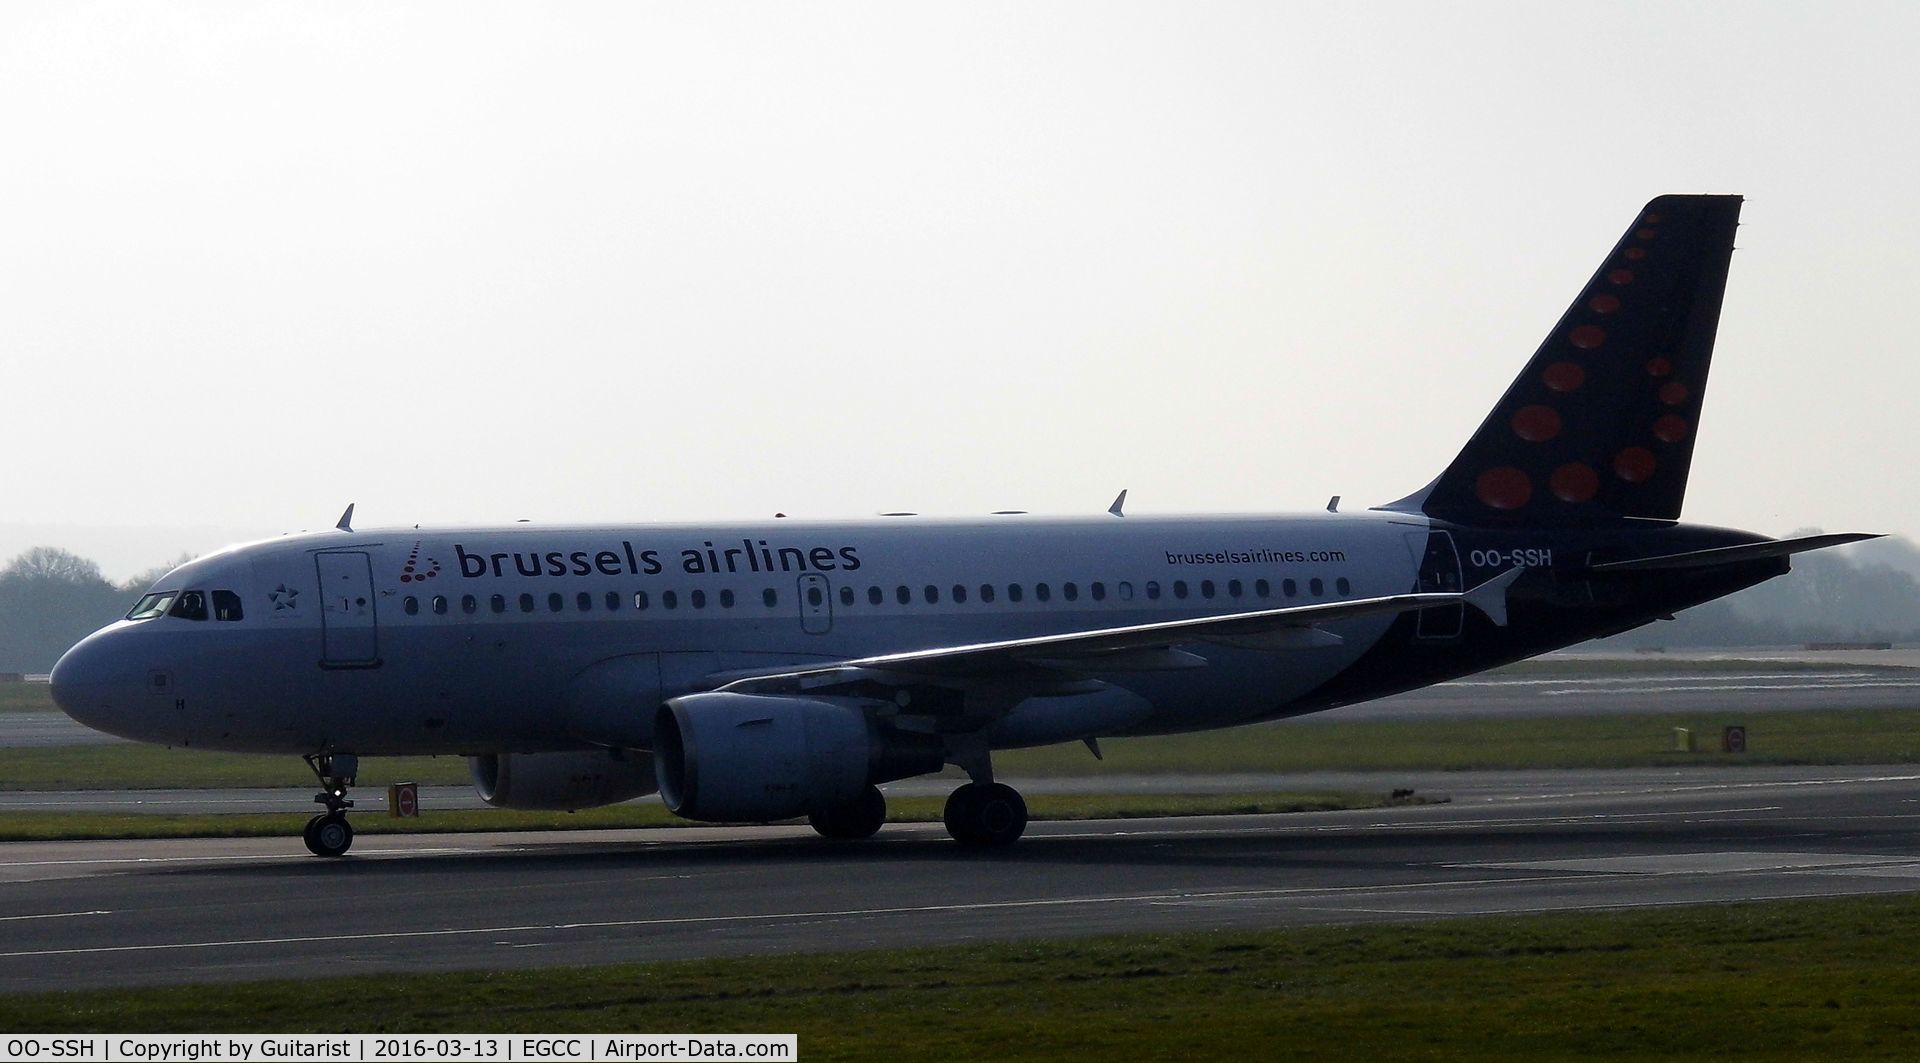 OO-SSH, 2006 Airbus A319-112 C/N 2925, At Manchester